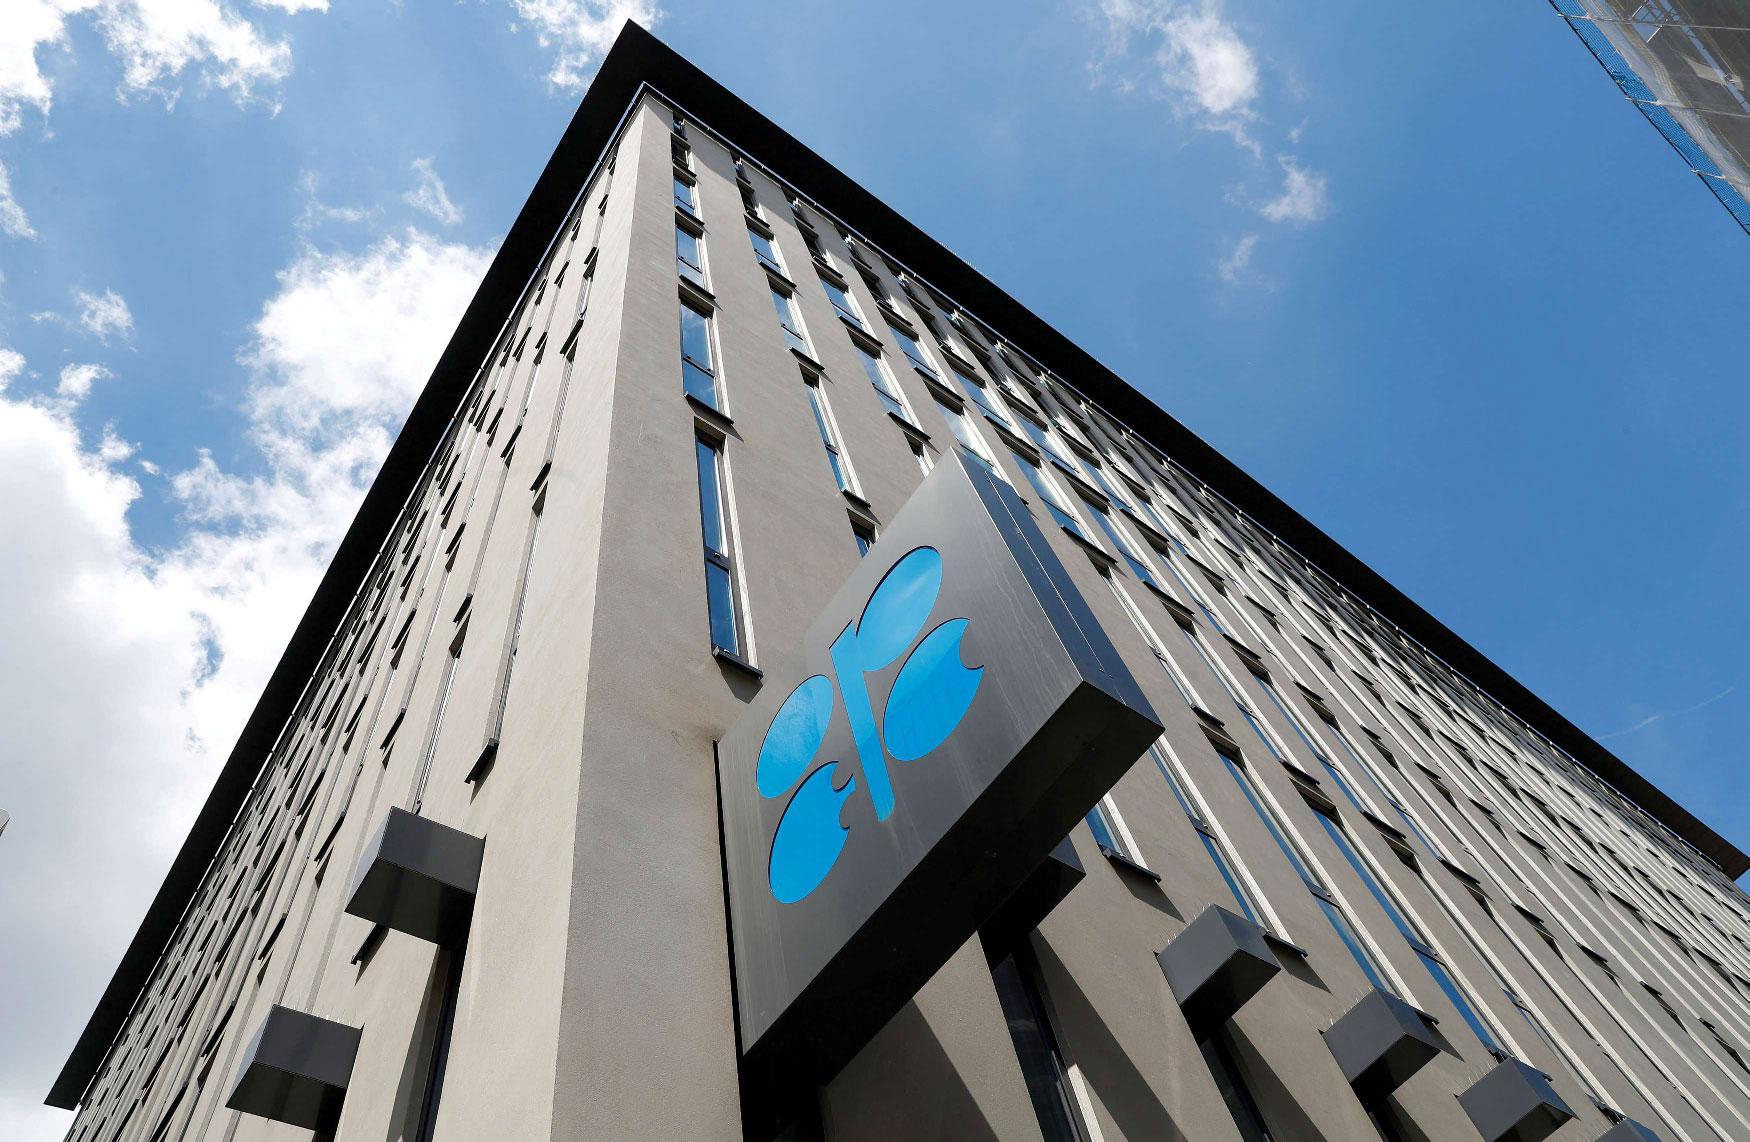 If OPEC does not trim production, prices could head much lower.